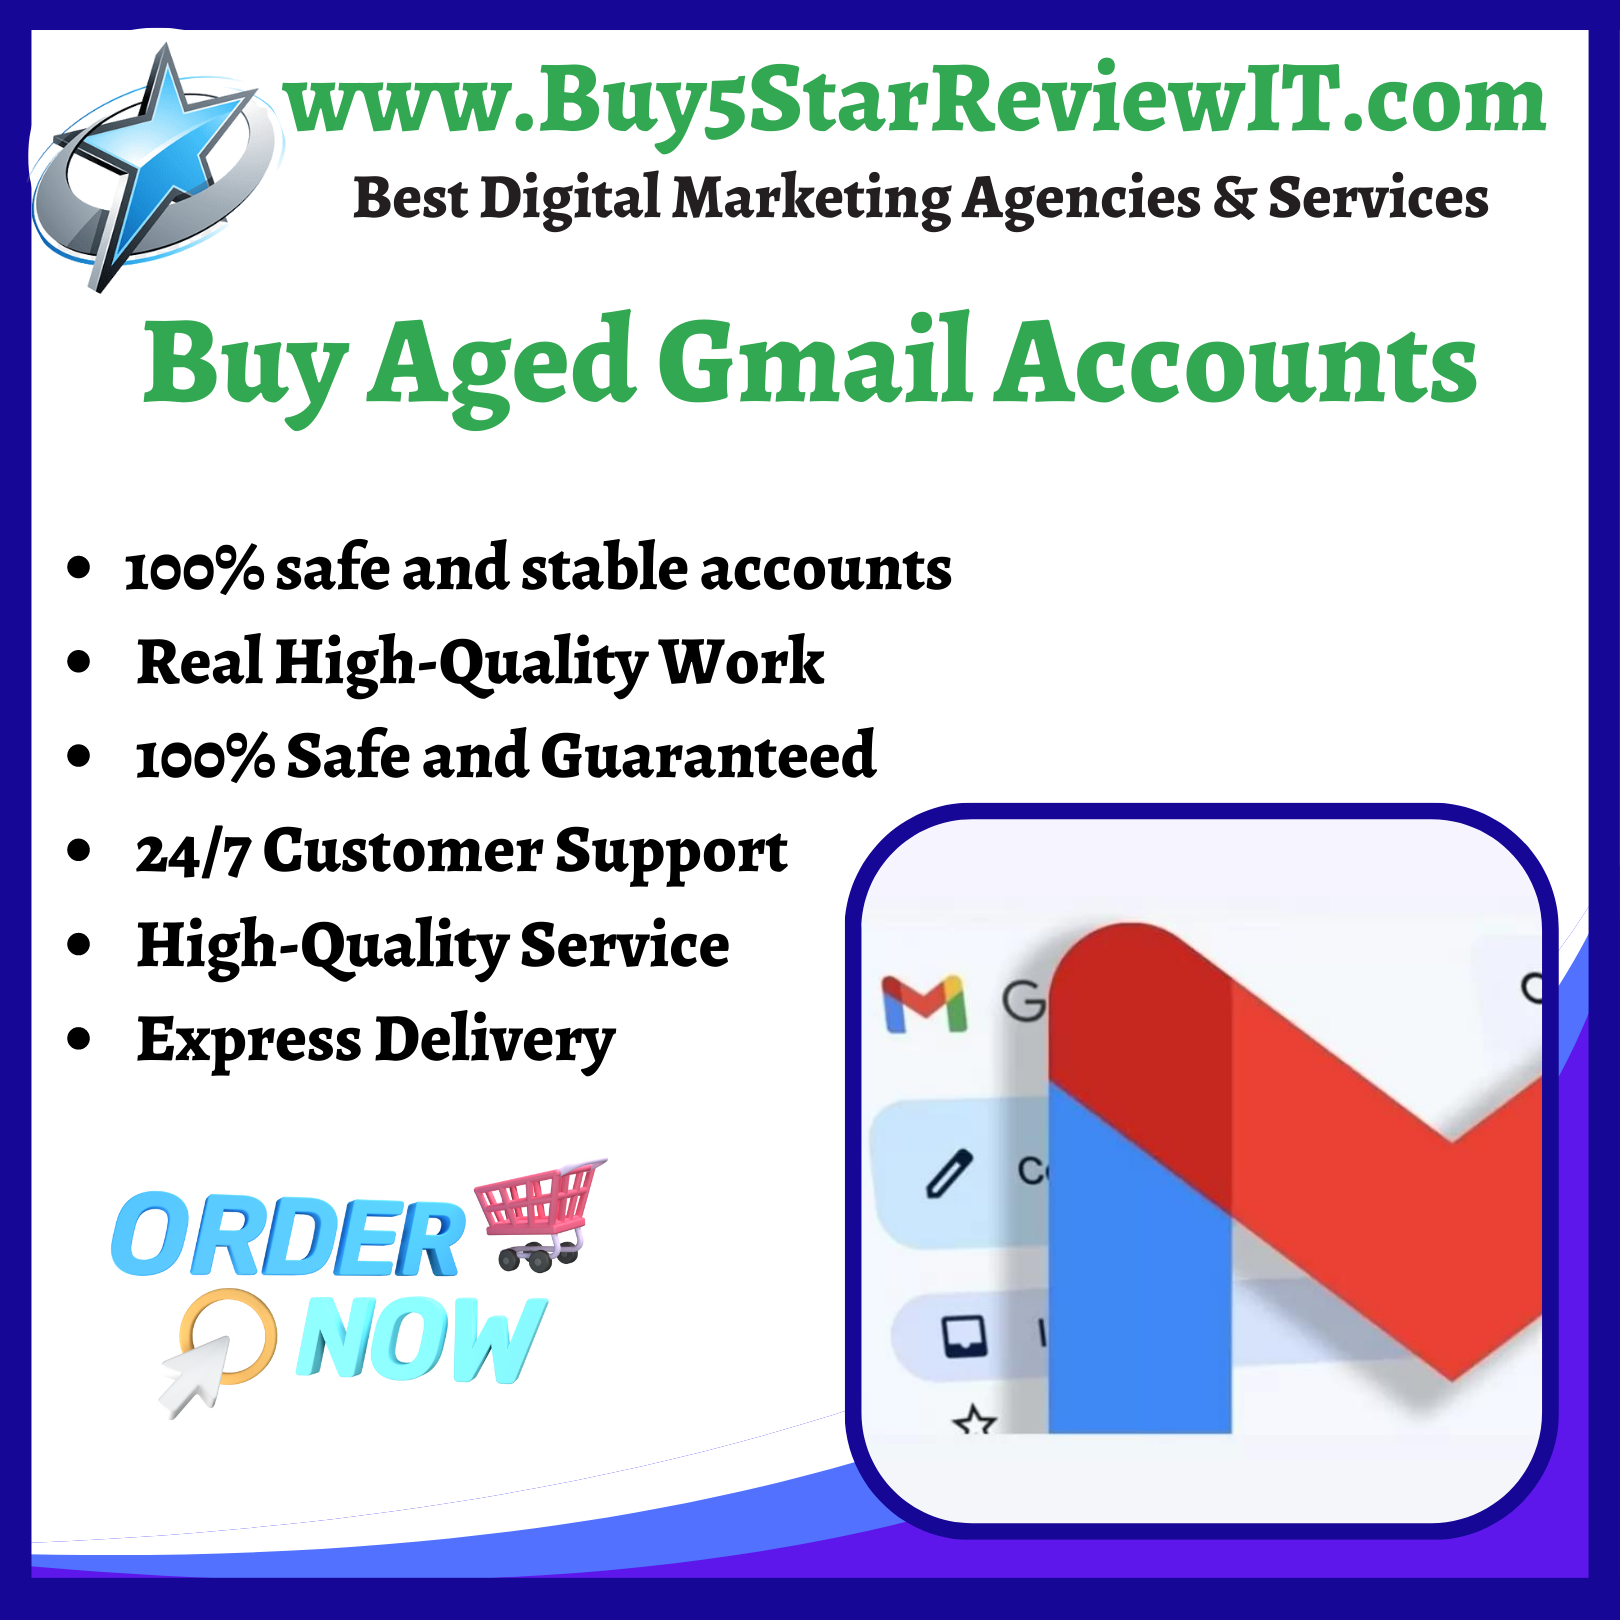 Buy Aged Gmail Accounts - Old, Aged, Very Low Price